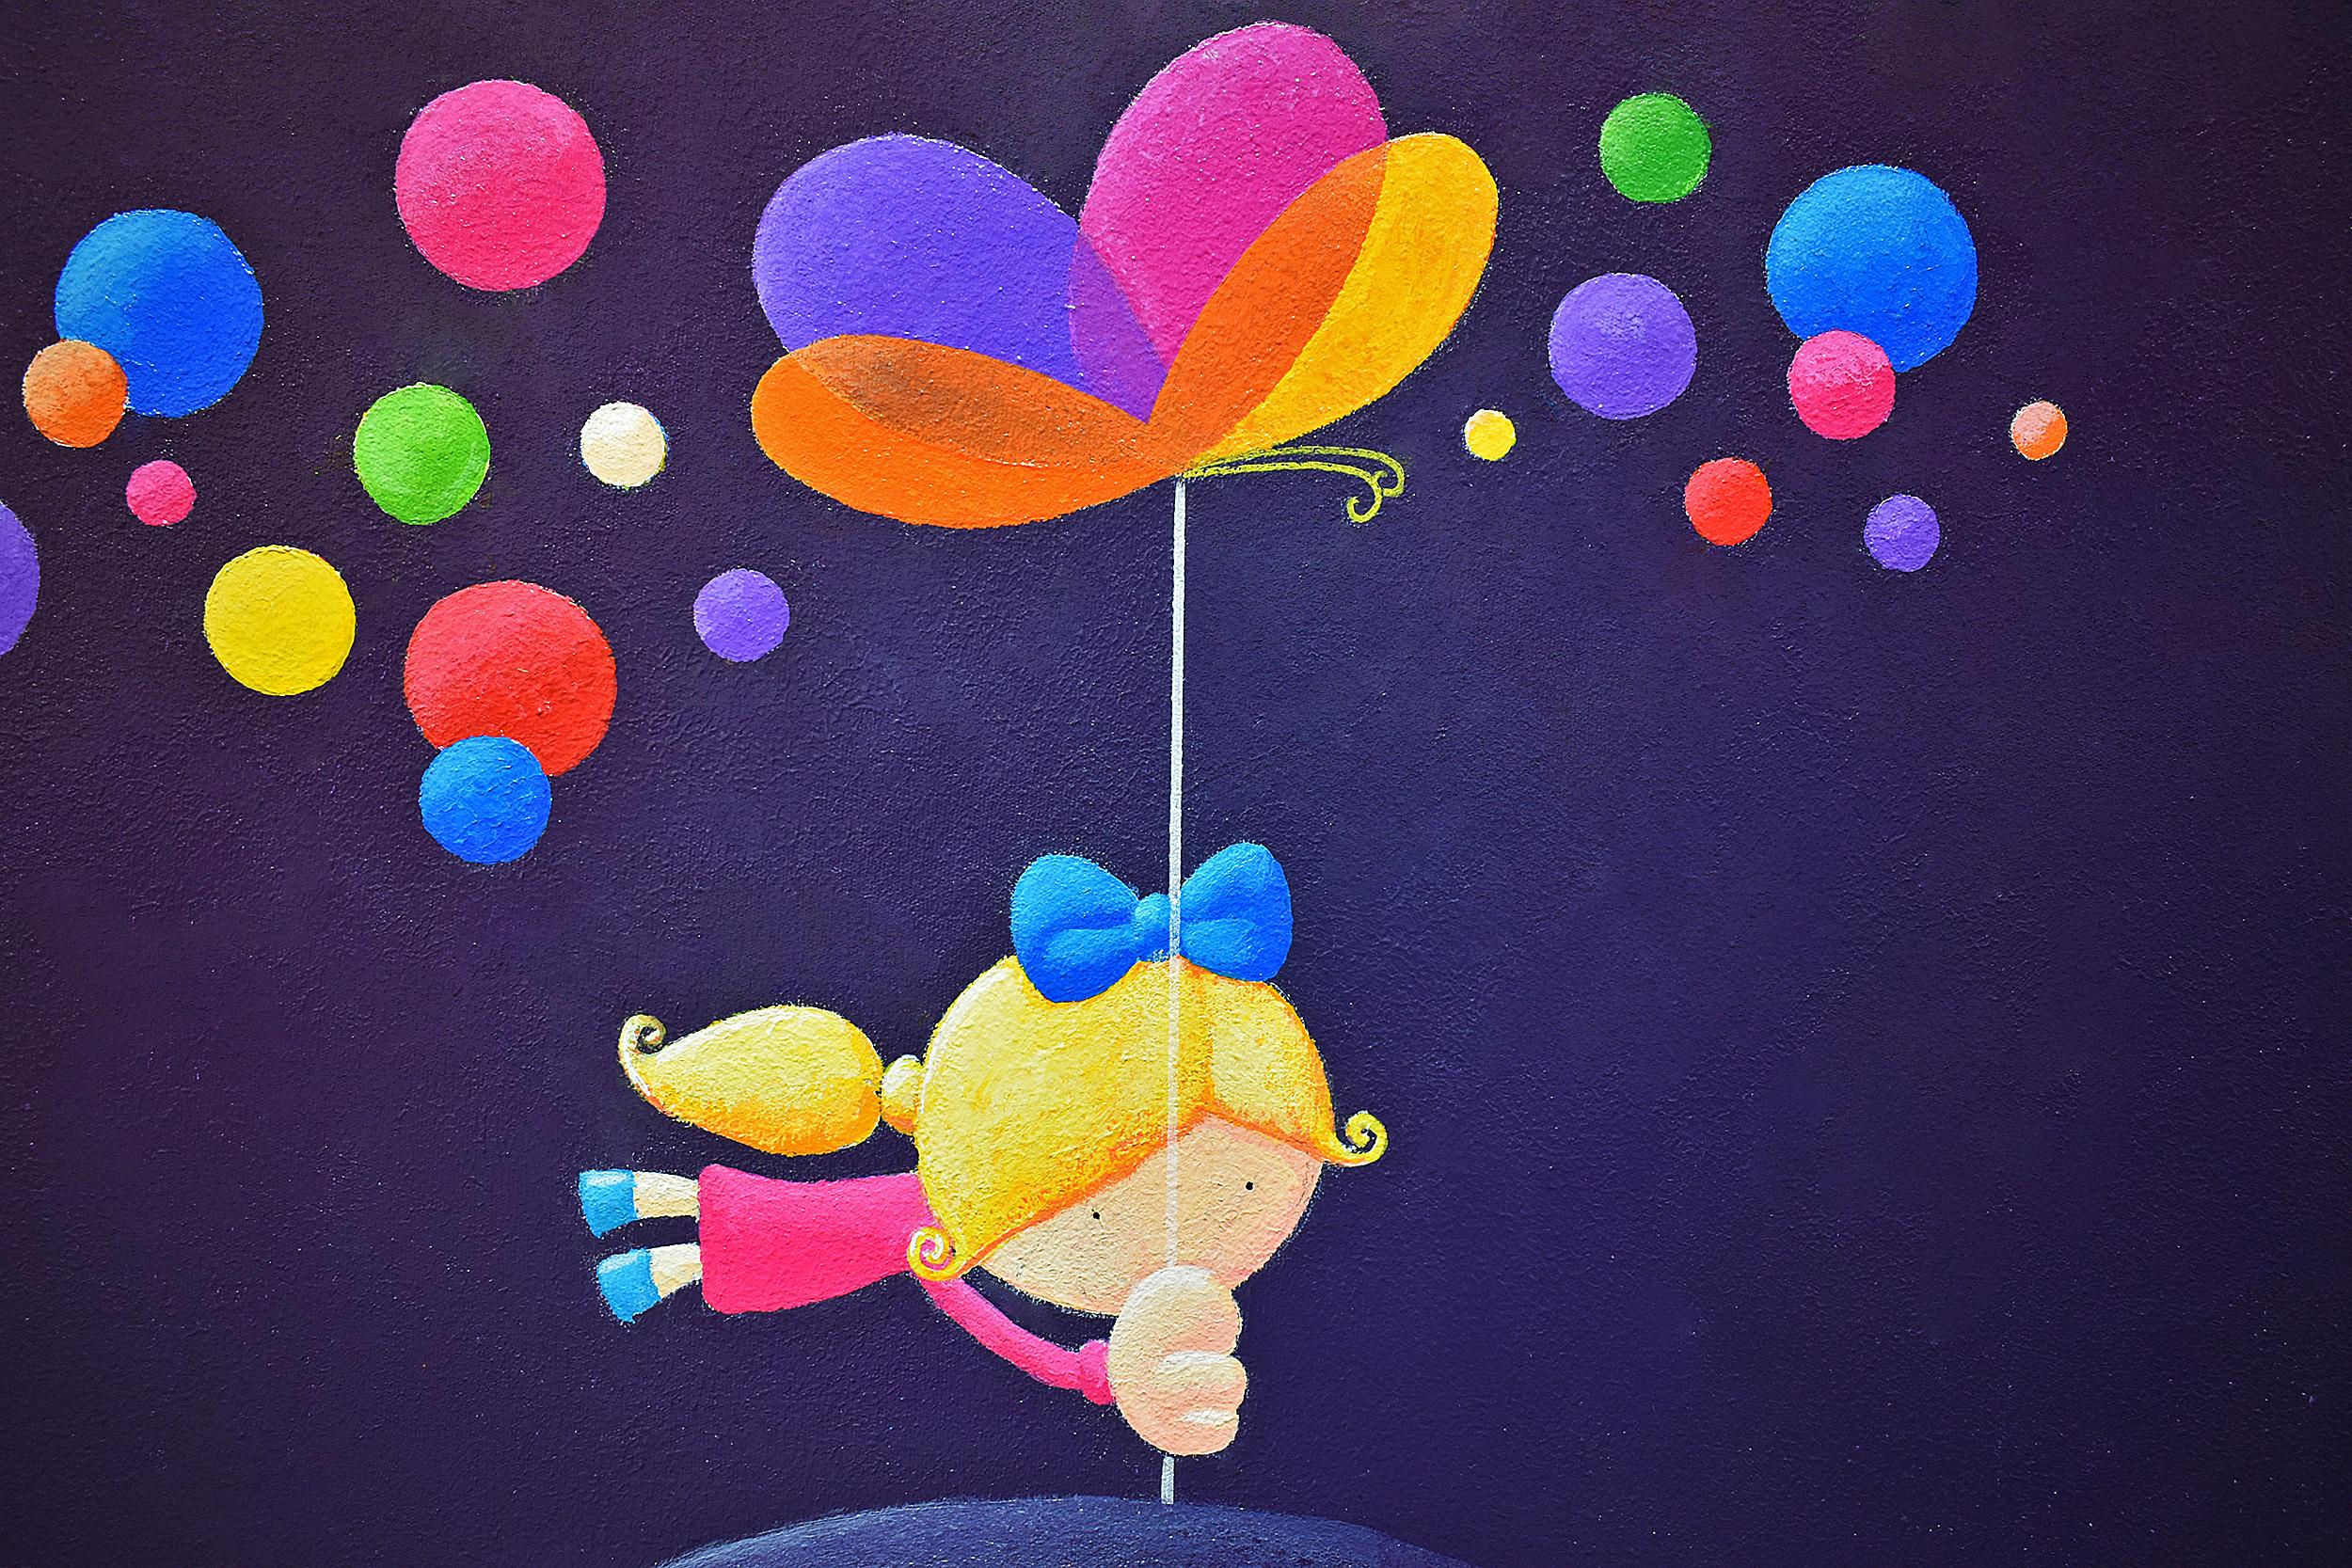 Love Flight, I am Happy, Colourful Pop Art, Children dreams, Freedom, Happiness - Painting by Mali Onder